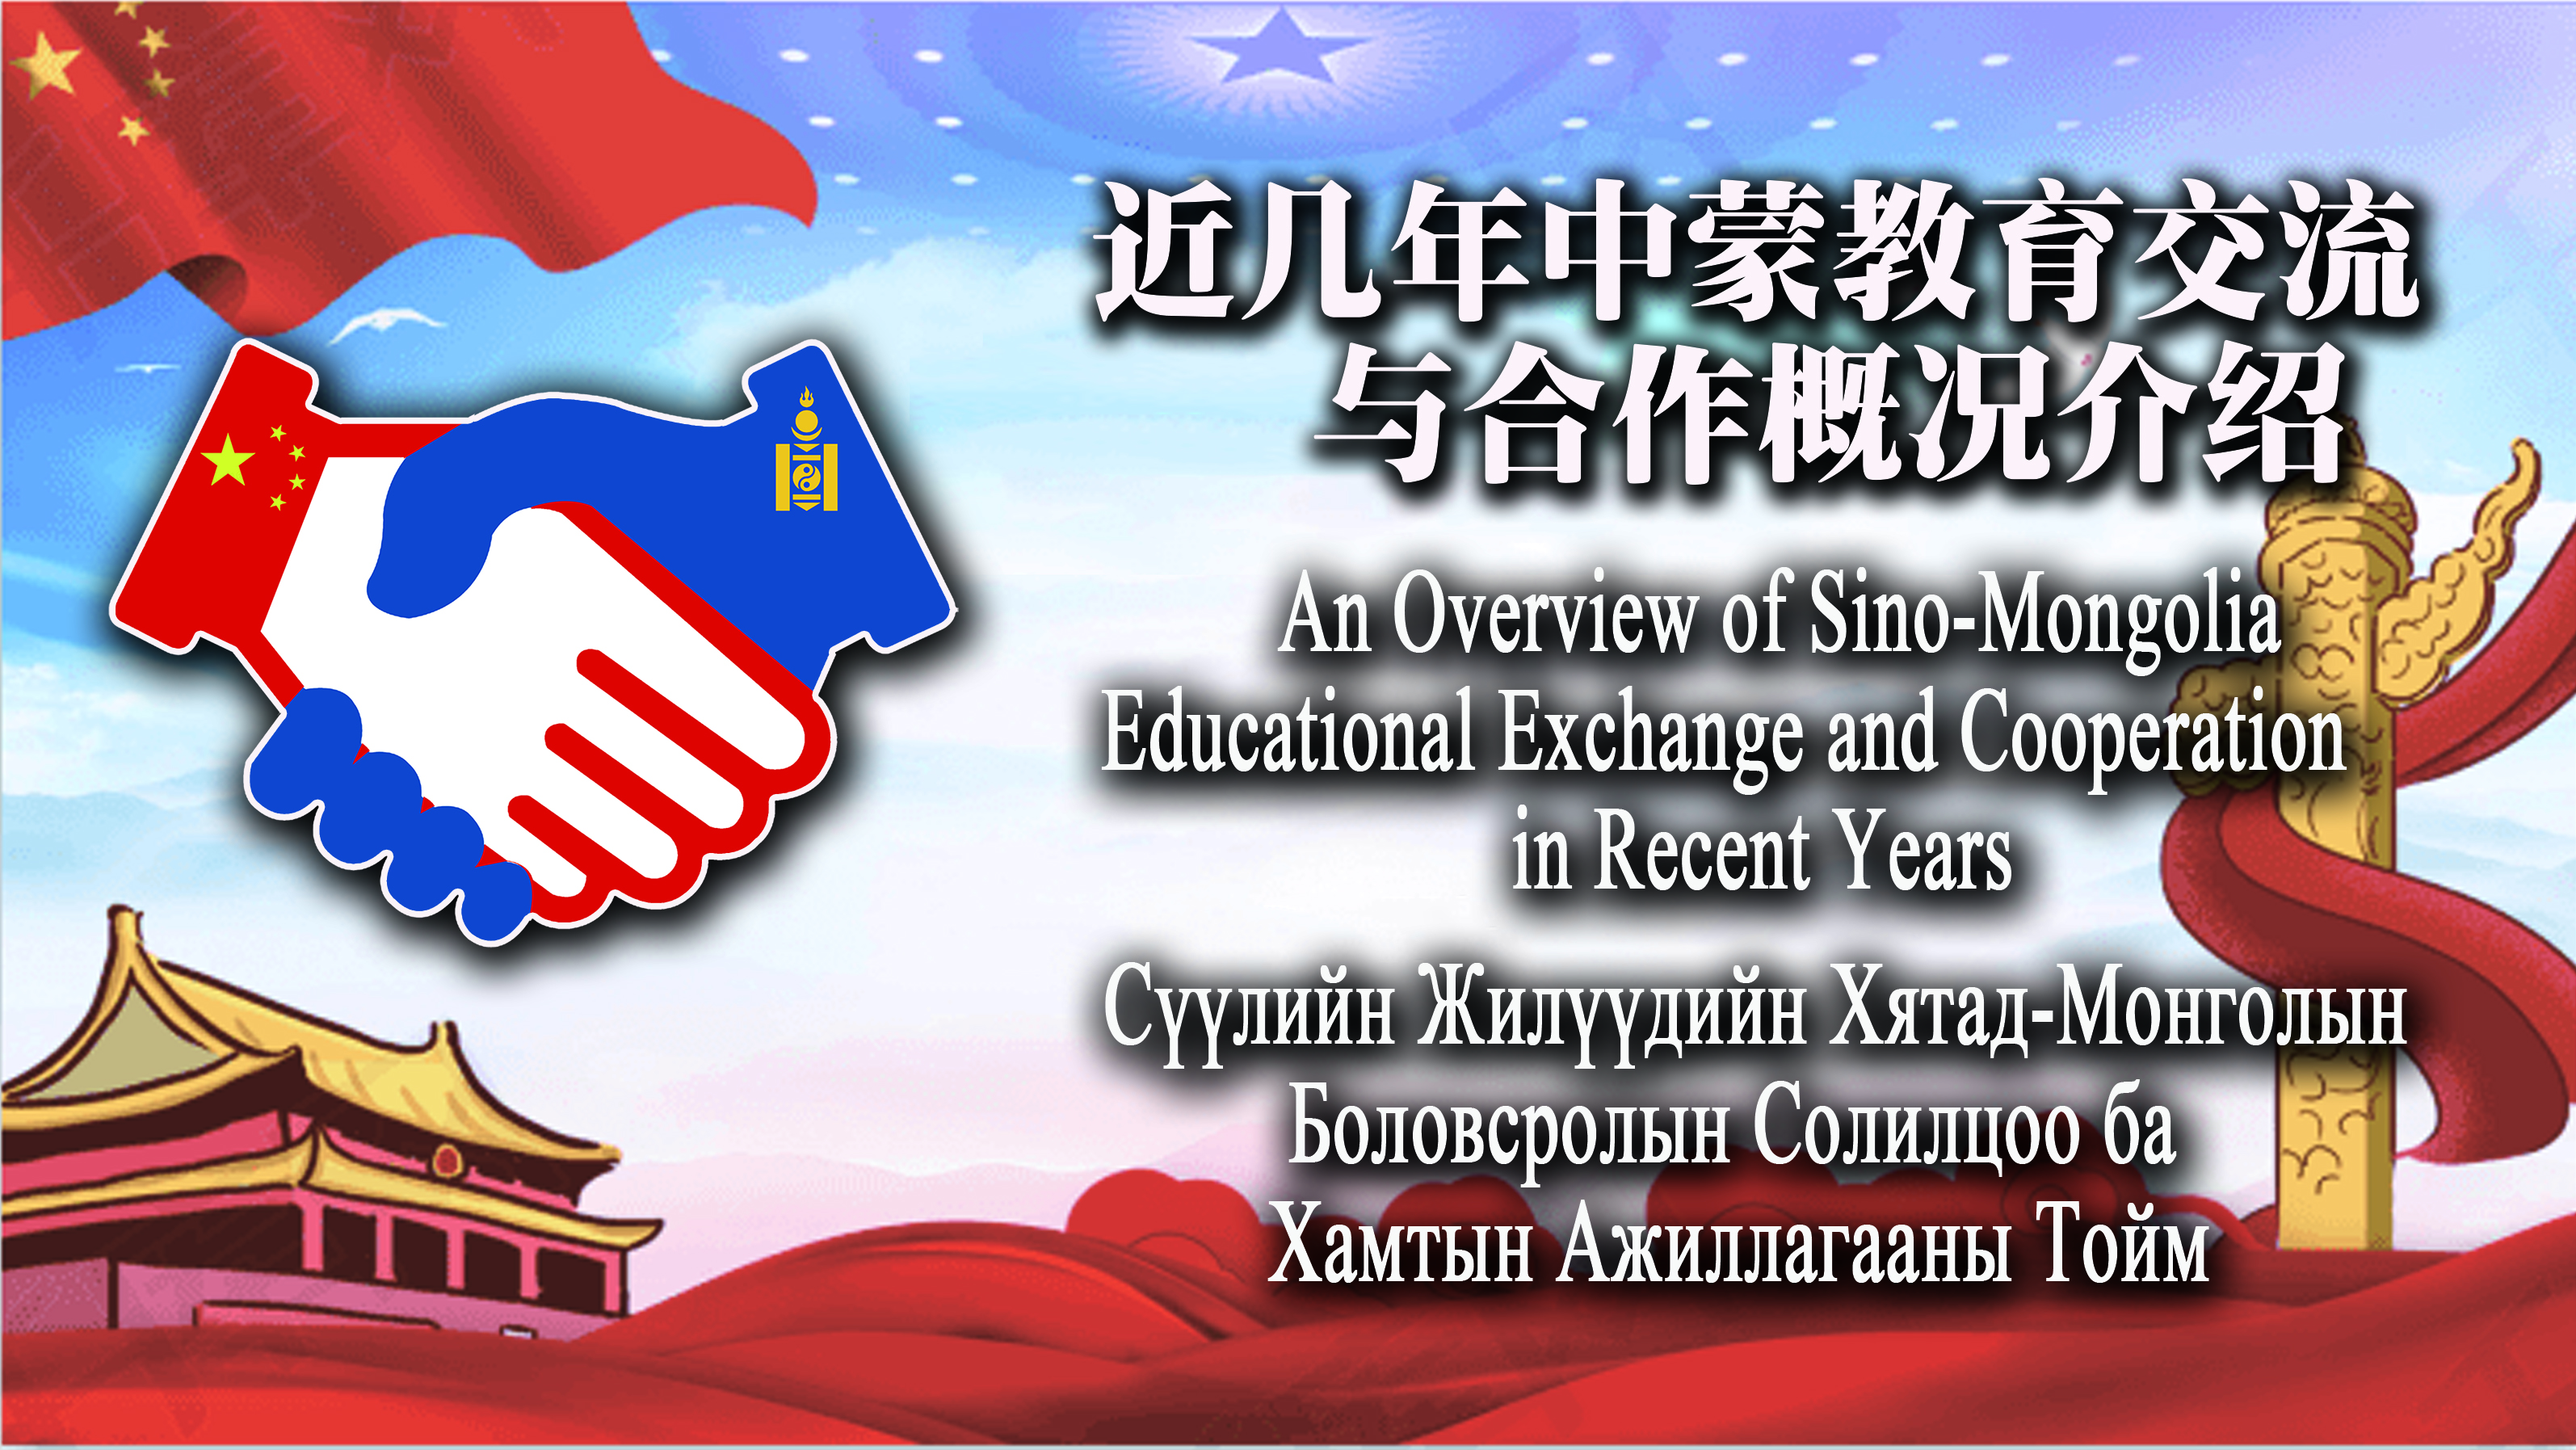 An overview of Sino-Mongolian educational exchanges and cooperation in recent years